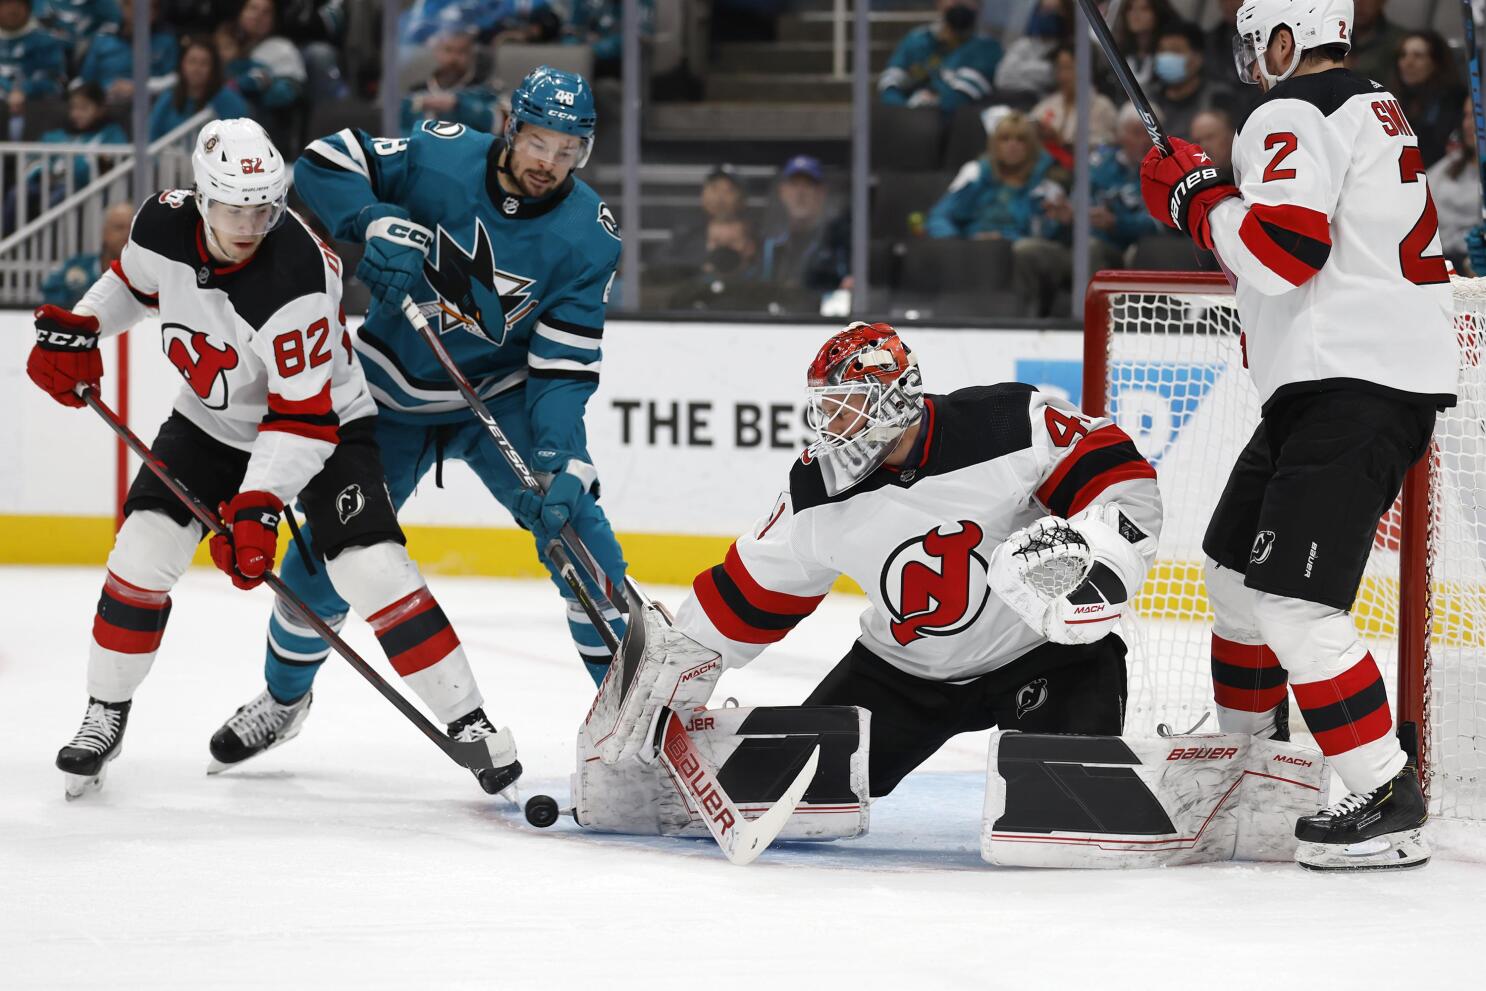 From left to right, San Jose Sharks center Tomas Hertl, left wing Alexander  Barabanov (94), right wing Timo Meier and center Logan Couture (39)  celebrate a goal by defenseman Erik Karlsson (obscured)